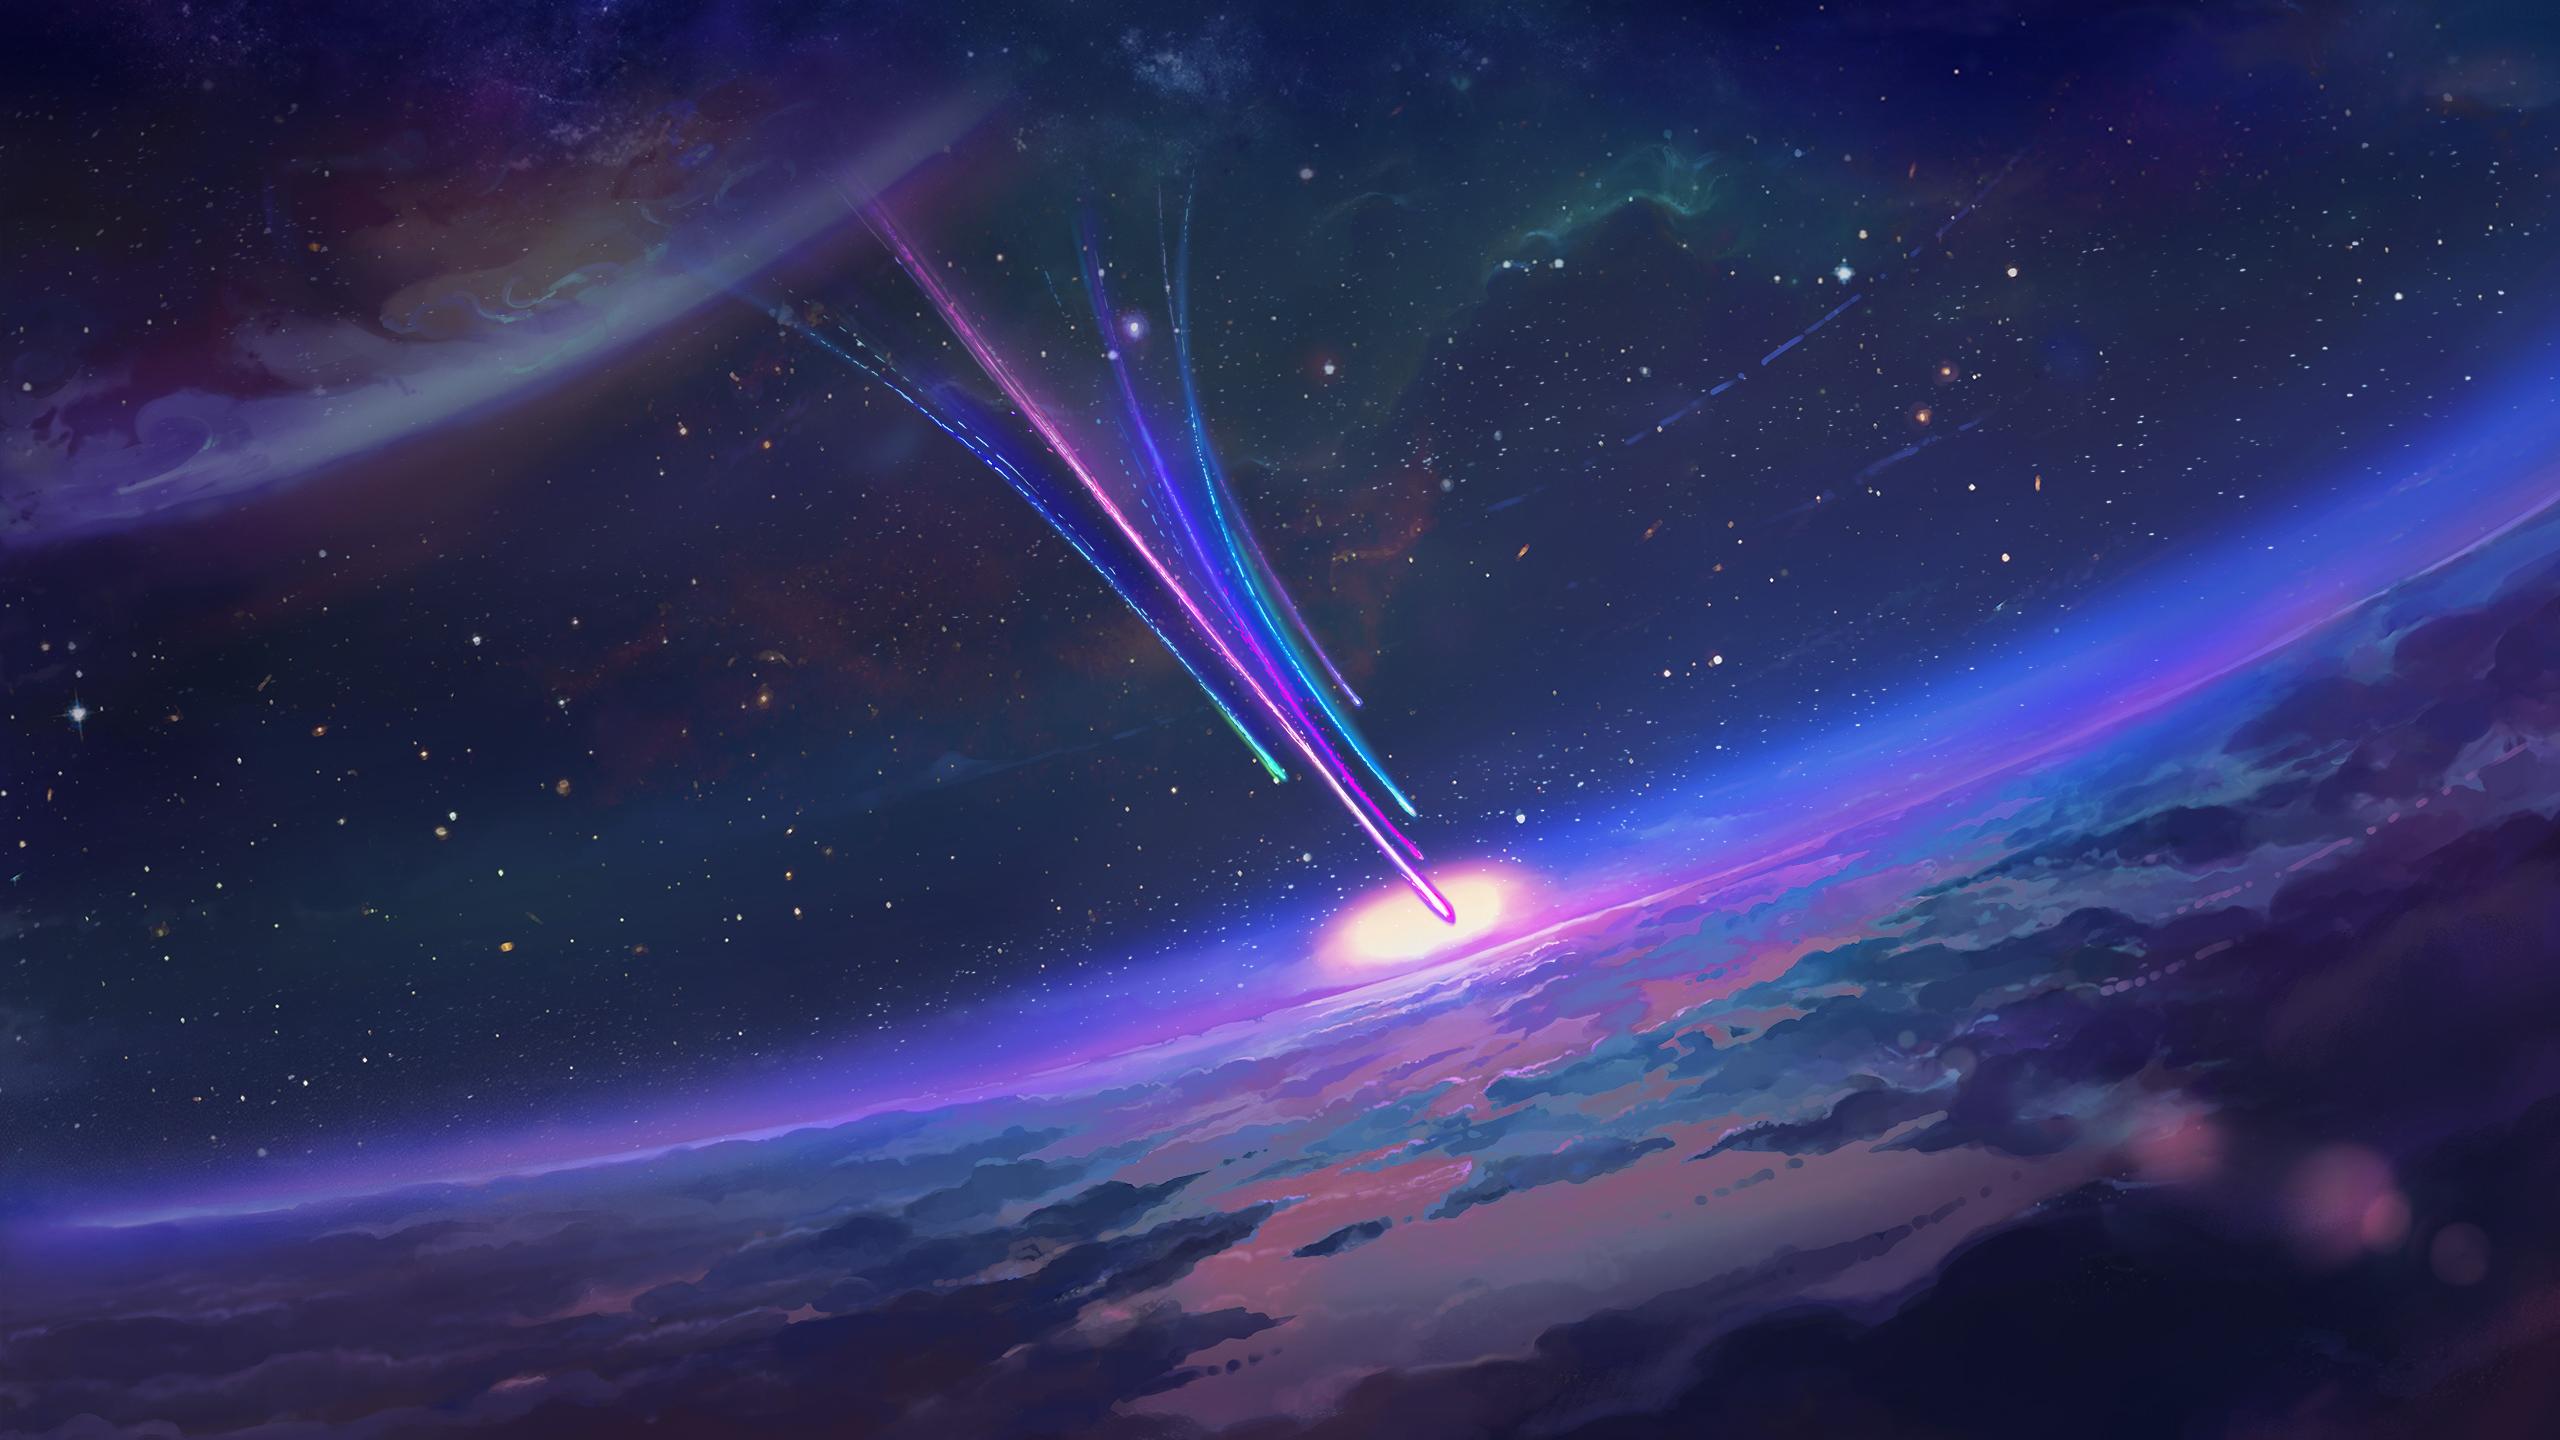 league of legends star guardian wallpaper,atmosphere,sky,outer space,space,aurora